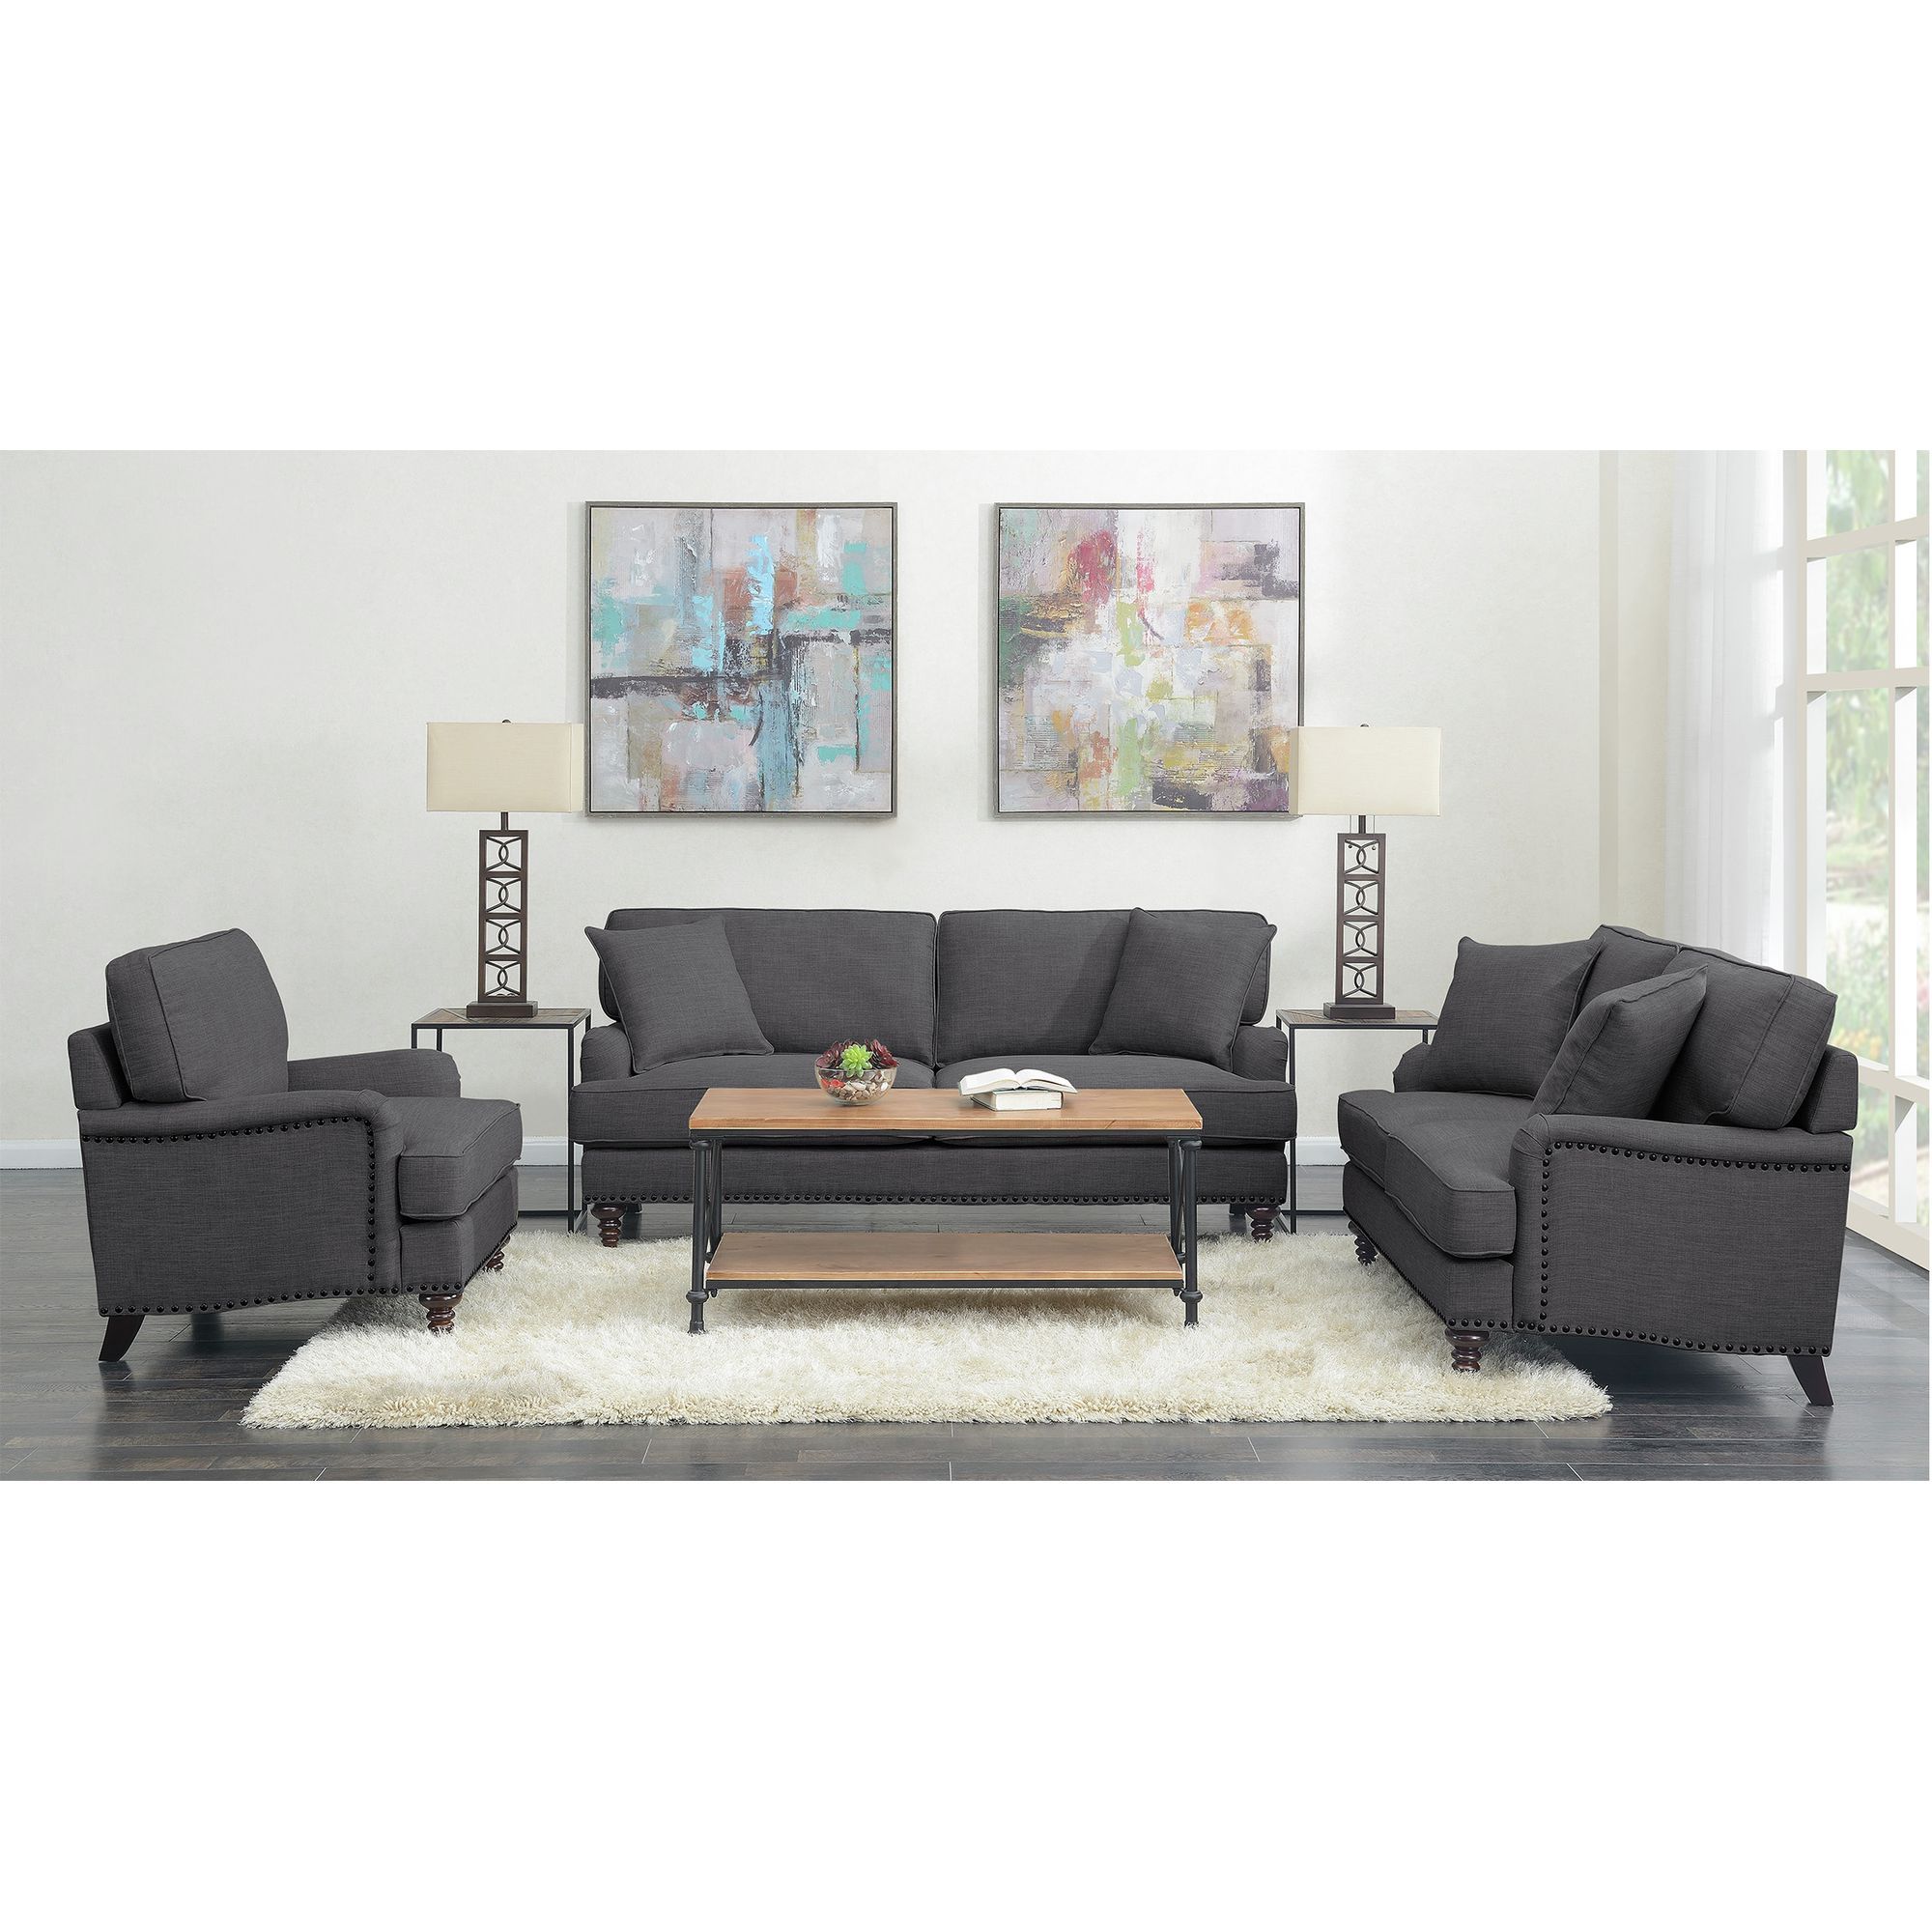 Abby 3PC Set-Sofa, Loveseat & Chair in Charcoal